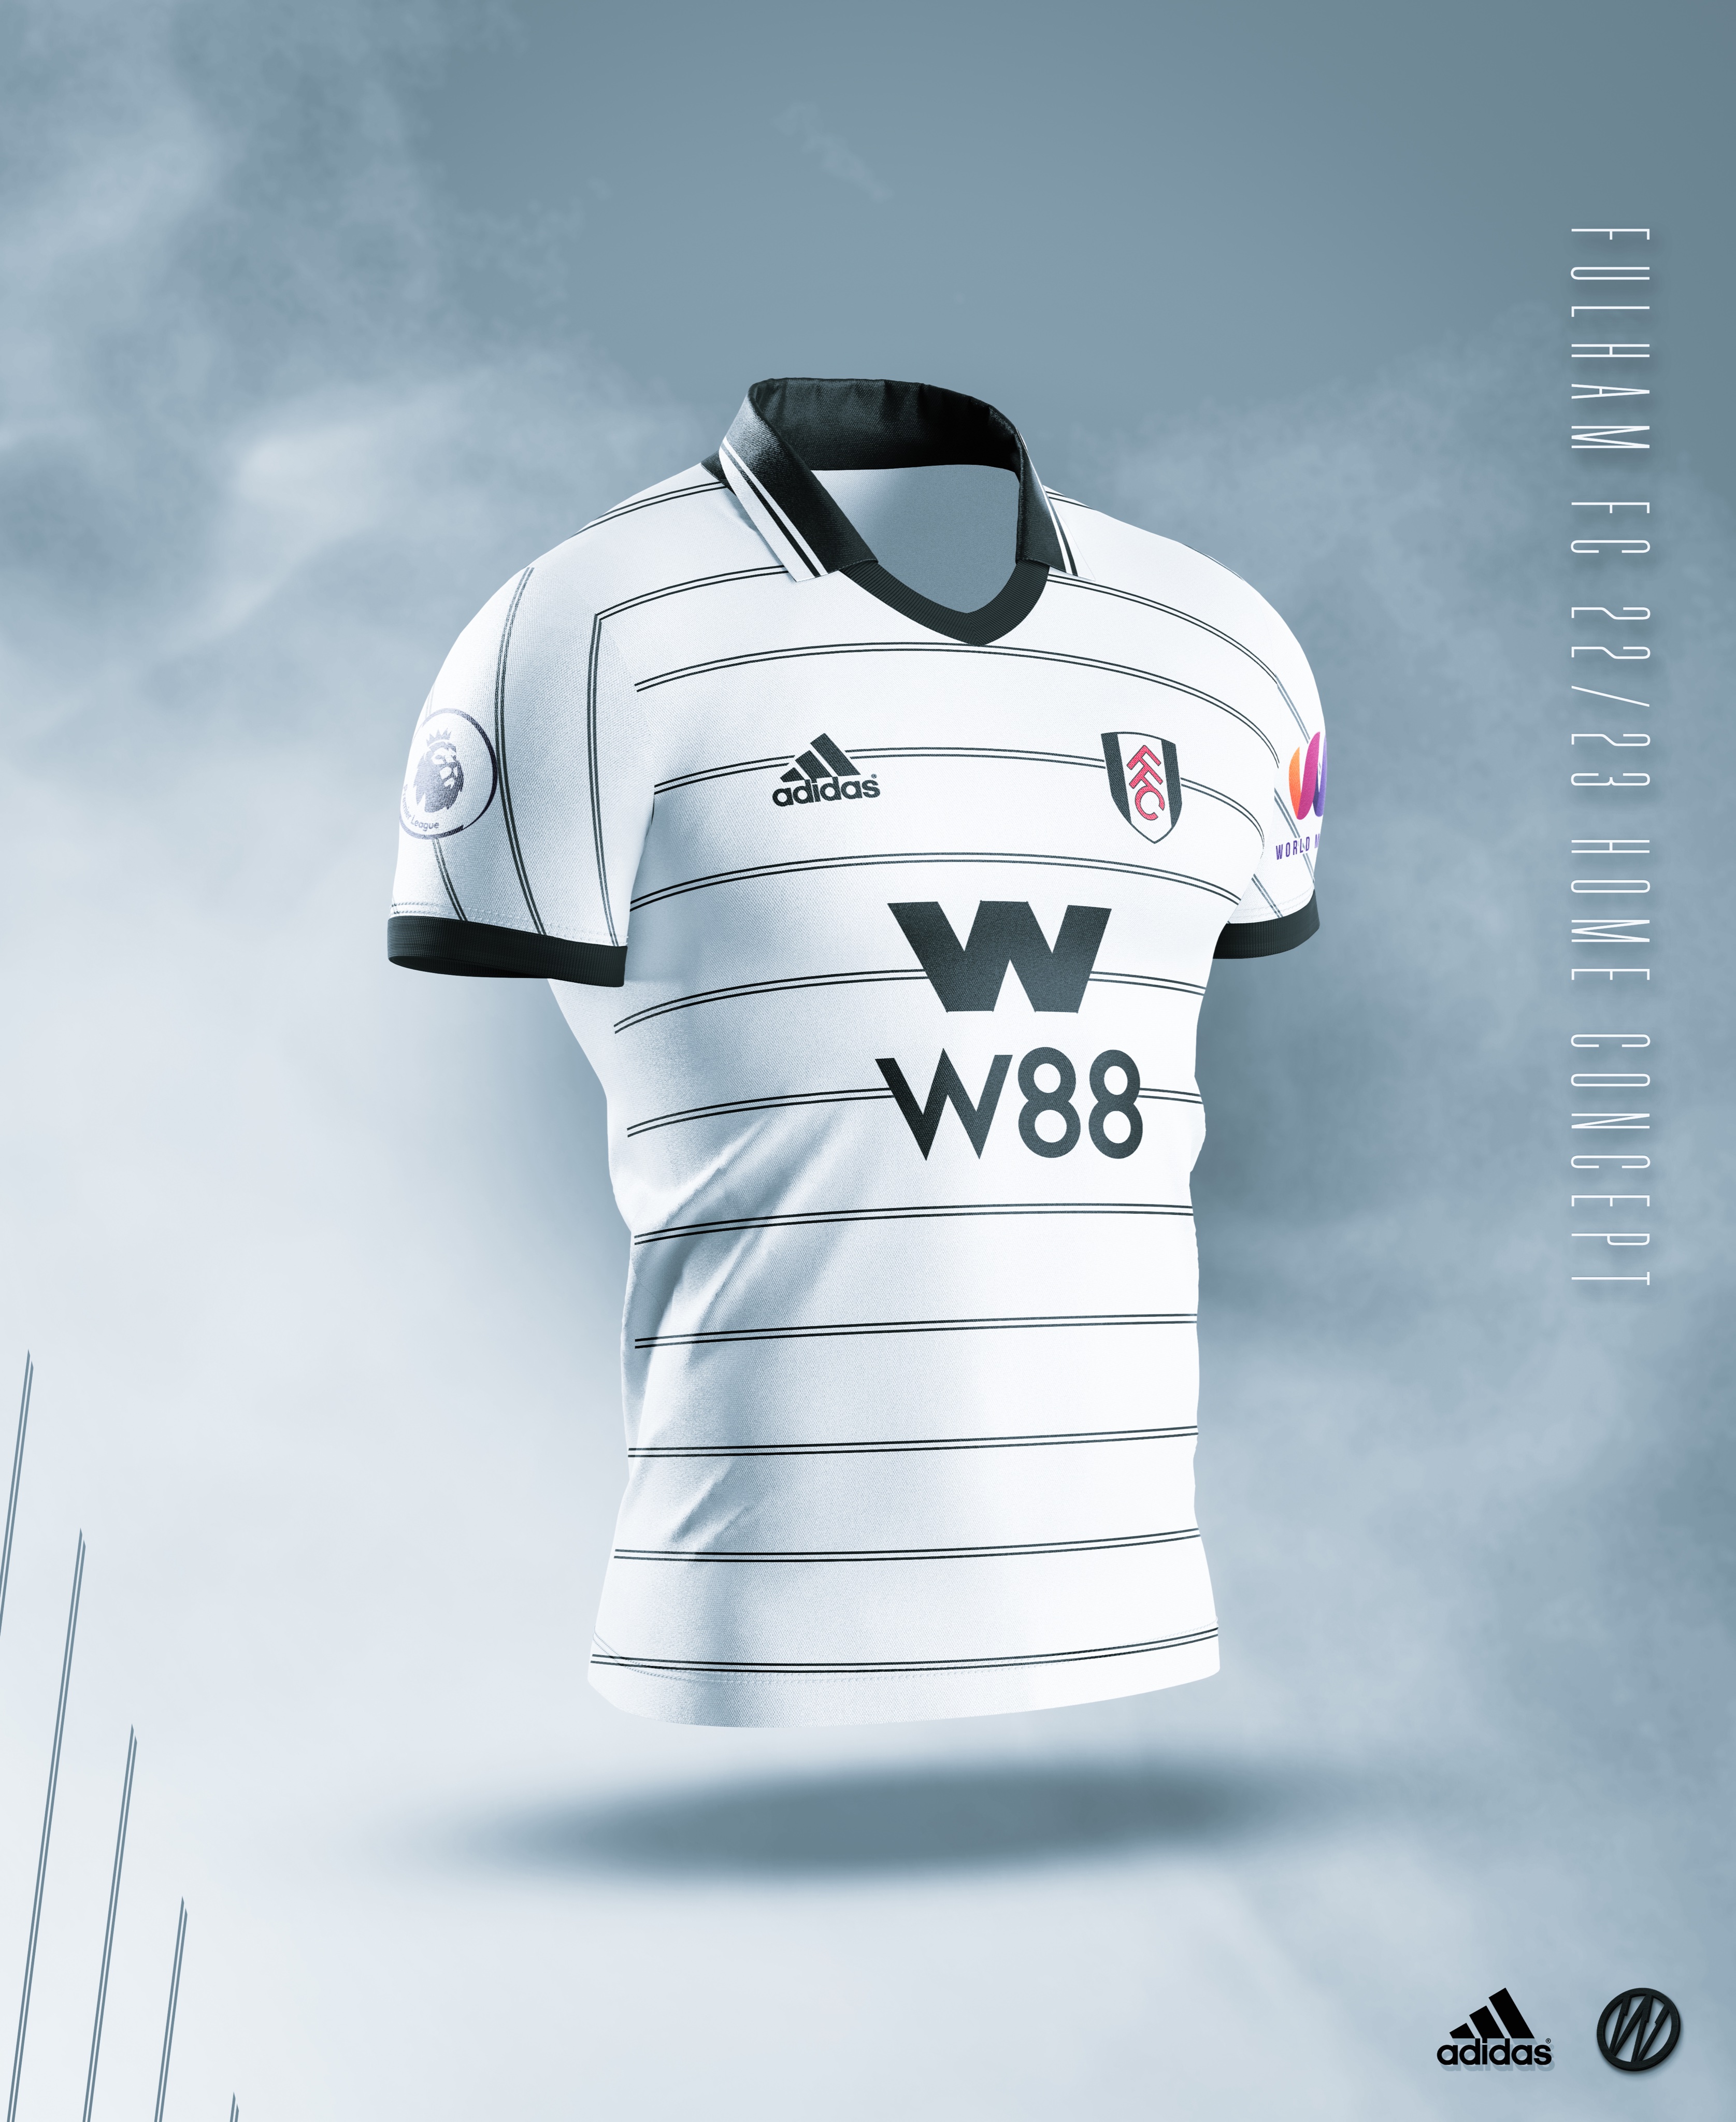 Fulham and W88 in Shirt Sponsorship Deal Next Season